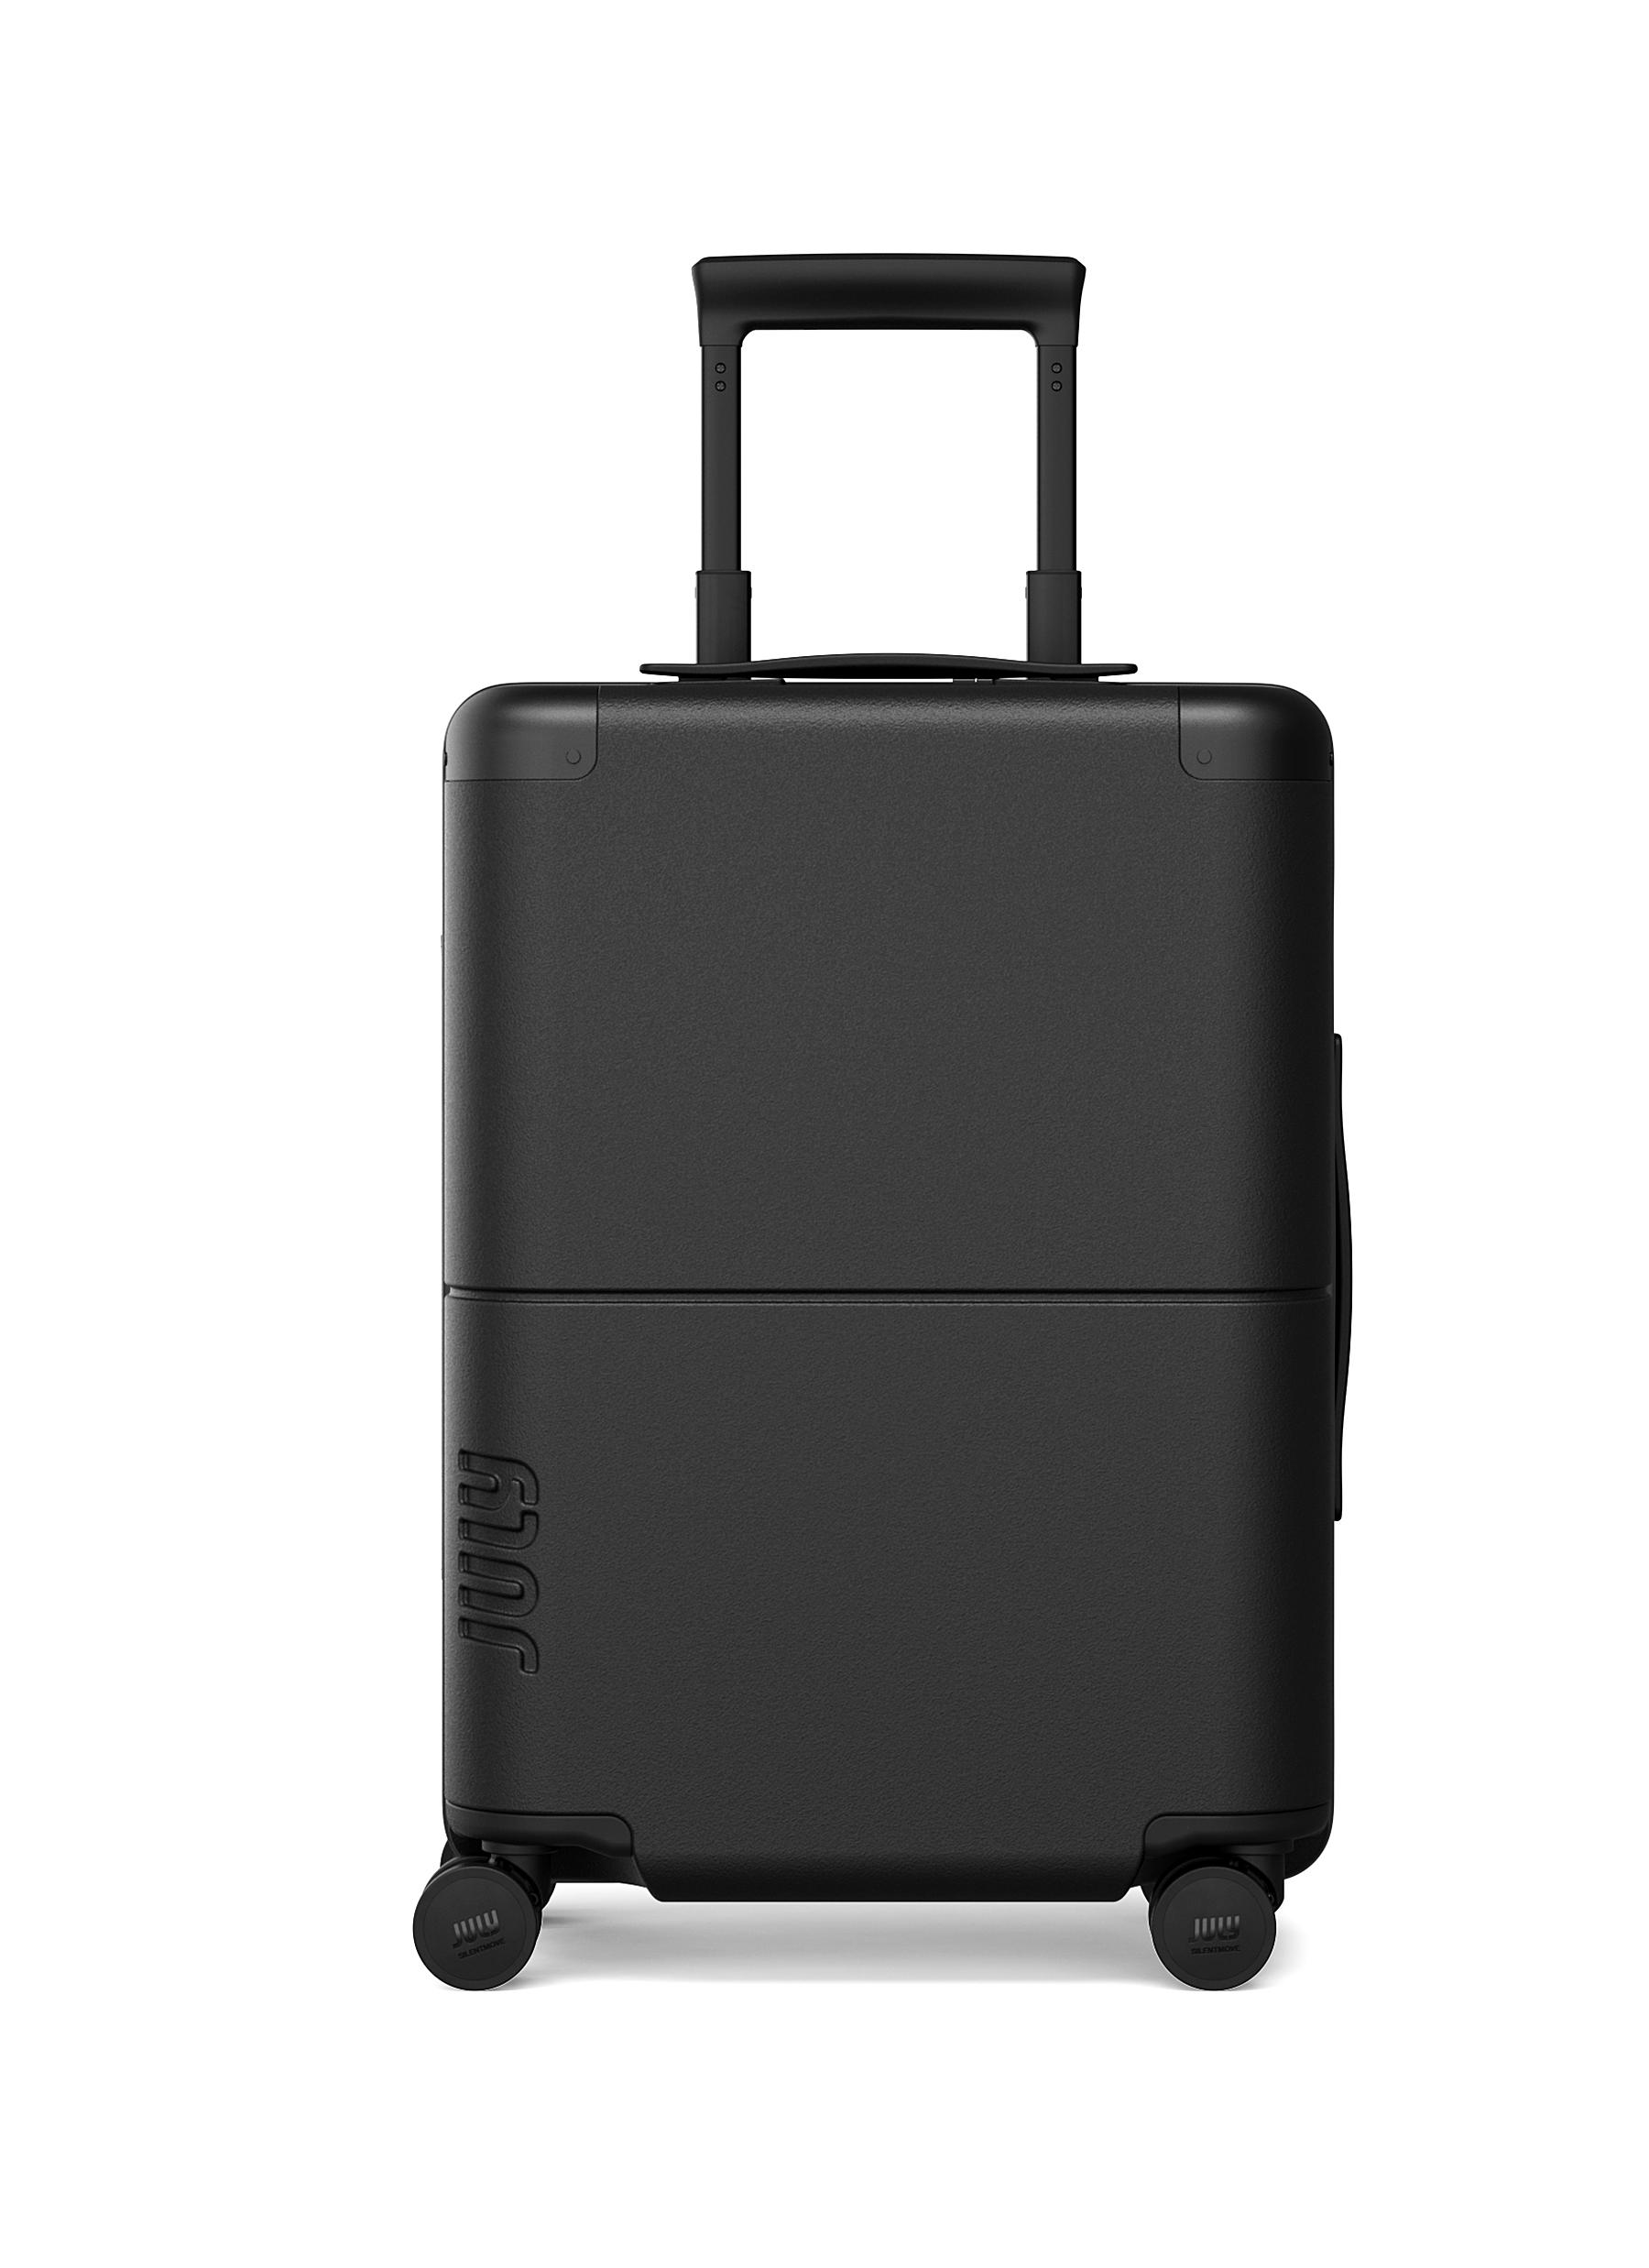 Carry On Suitcase - Charcoal Black